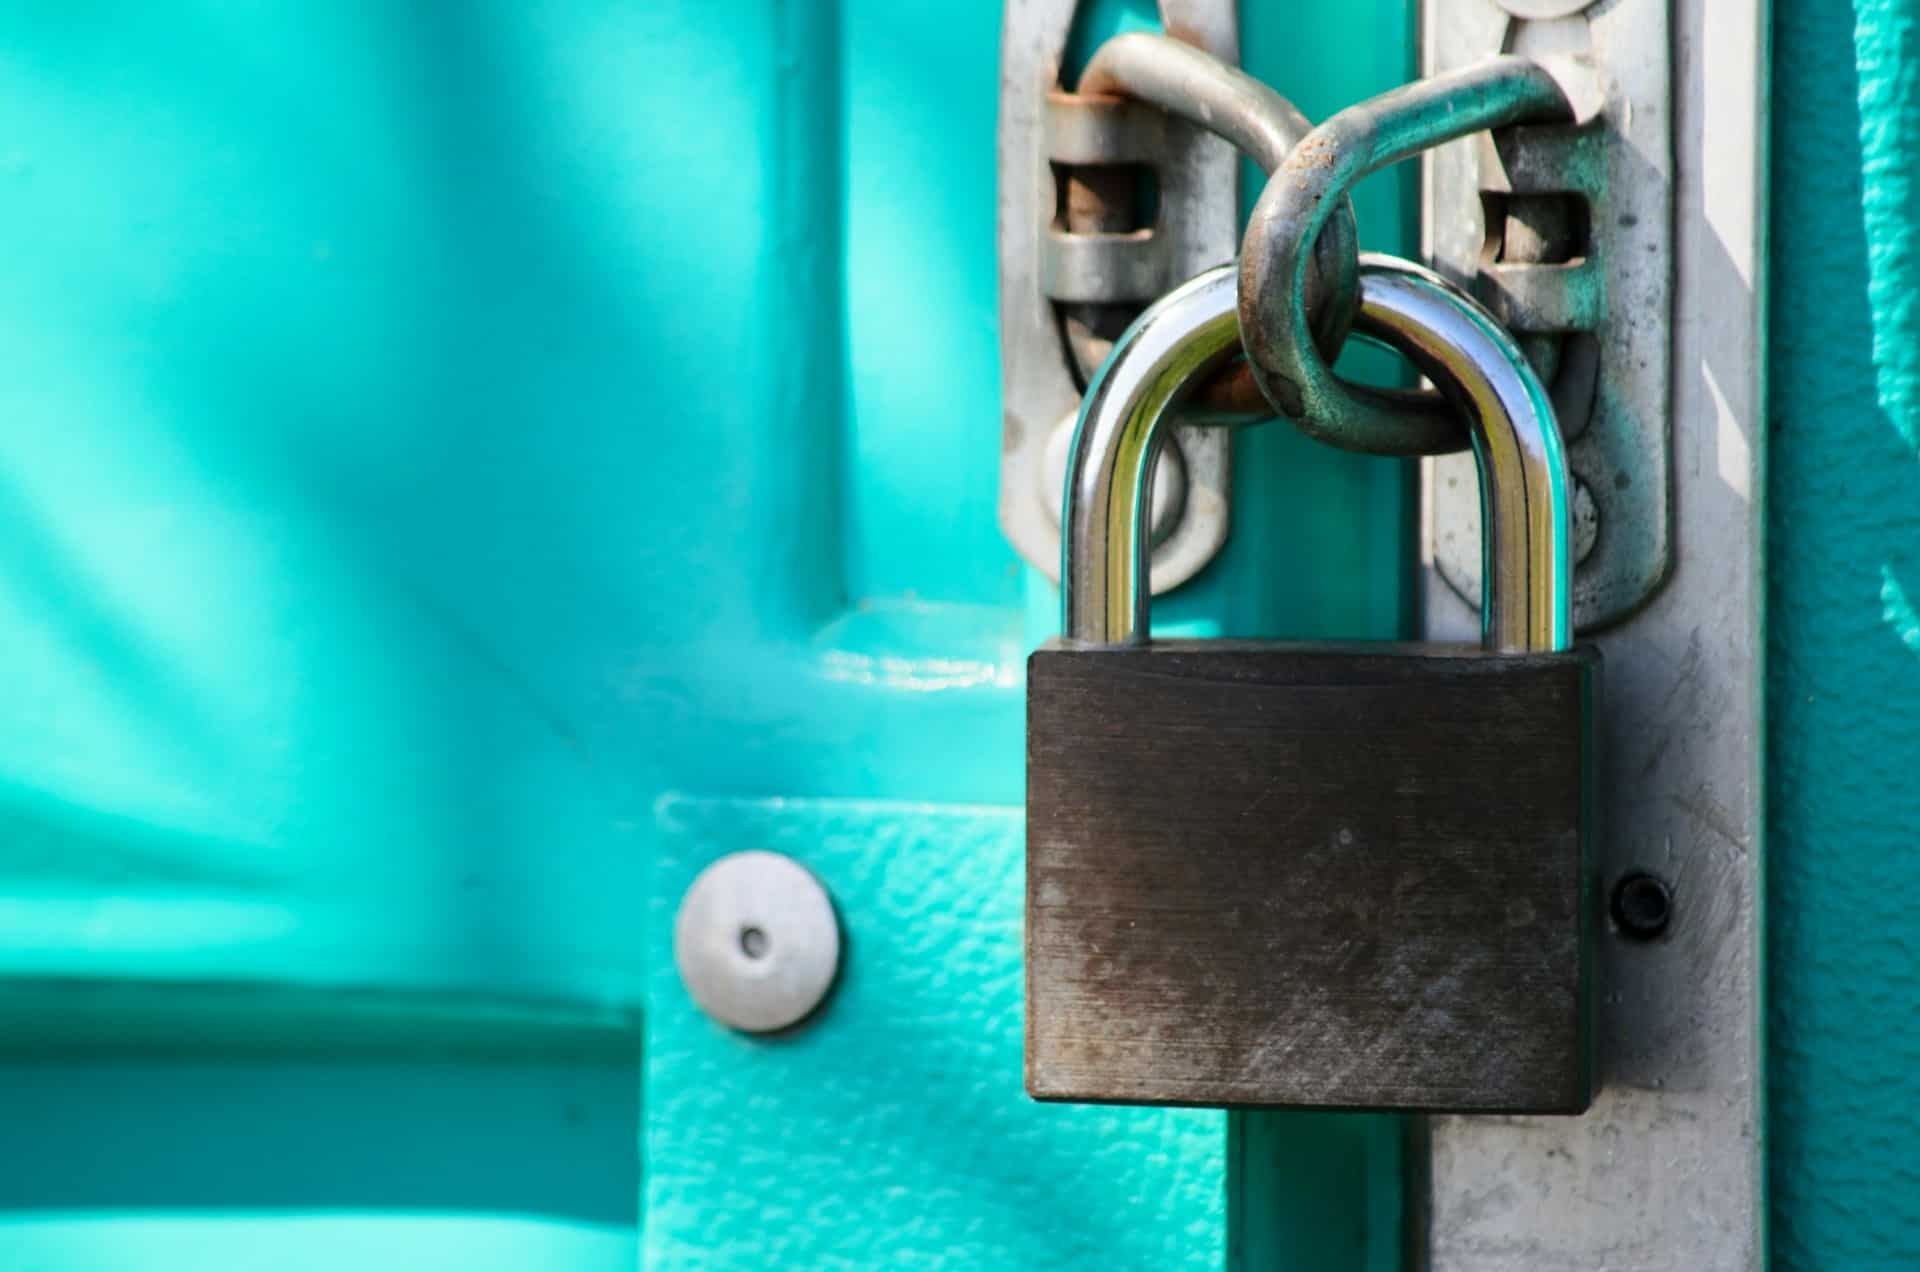 A sturdy padlock secures a teal door, symbolizing safety, privacy, and GDPR compliance.